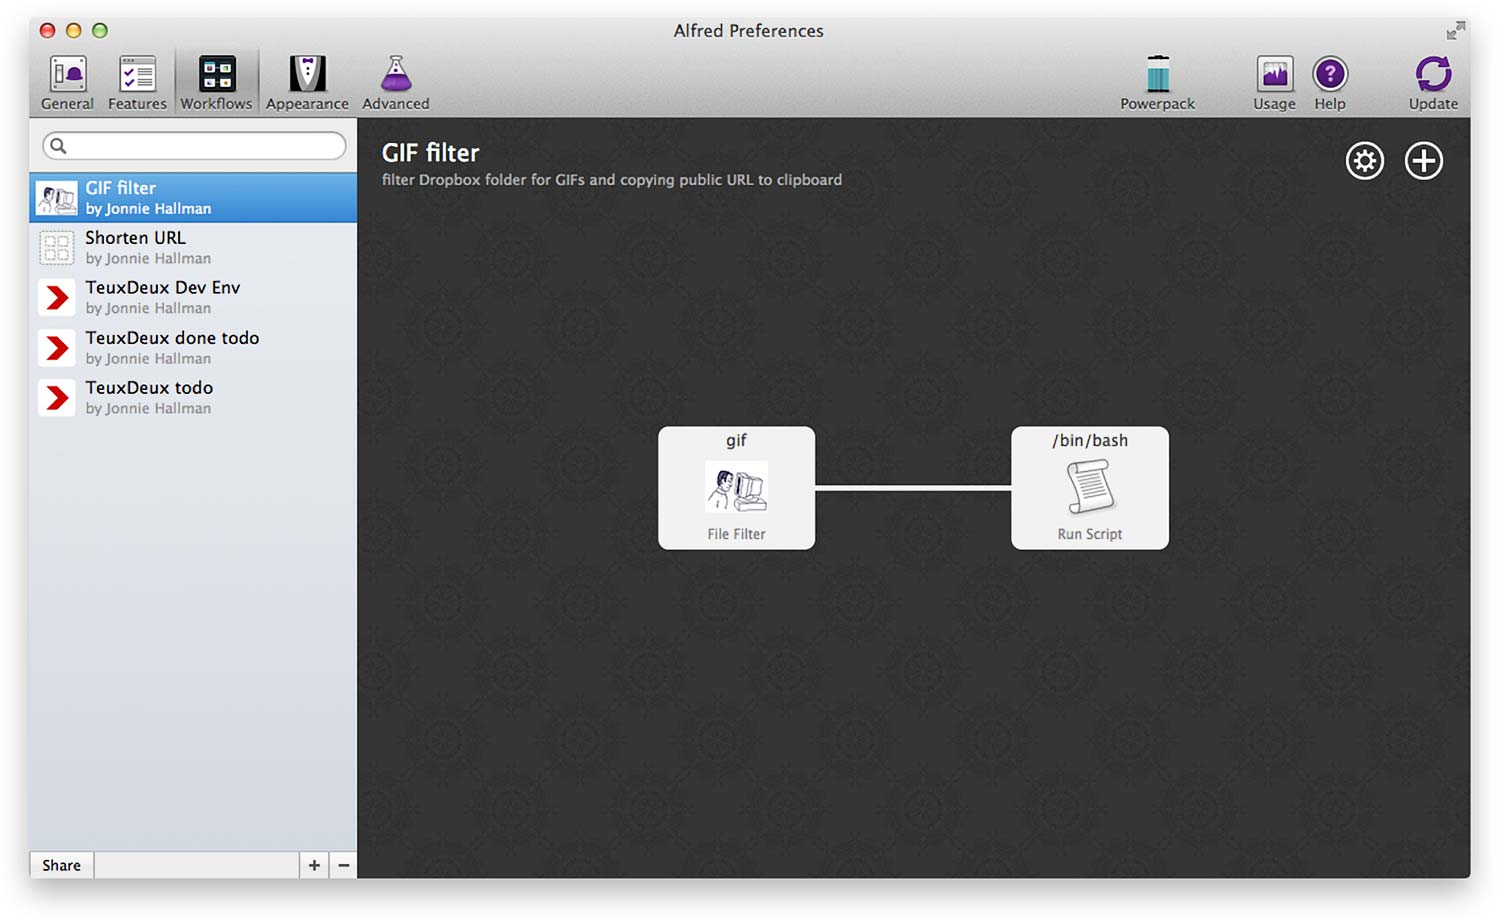 gif-workflow-alfred-workflow